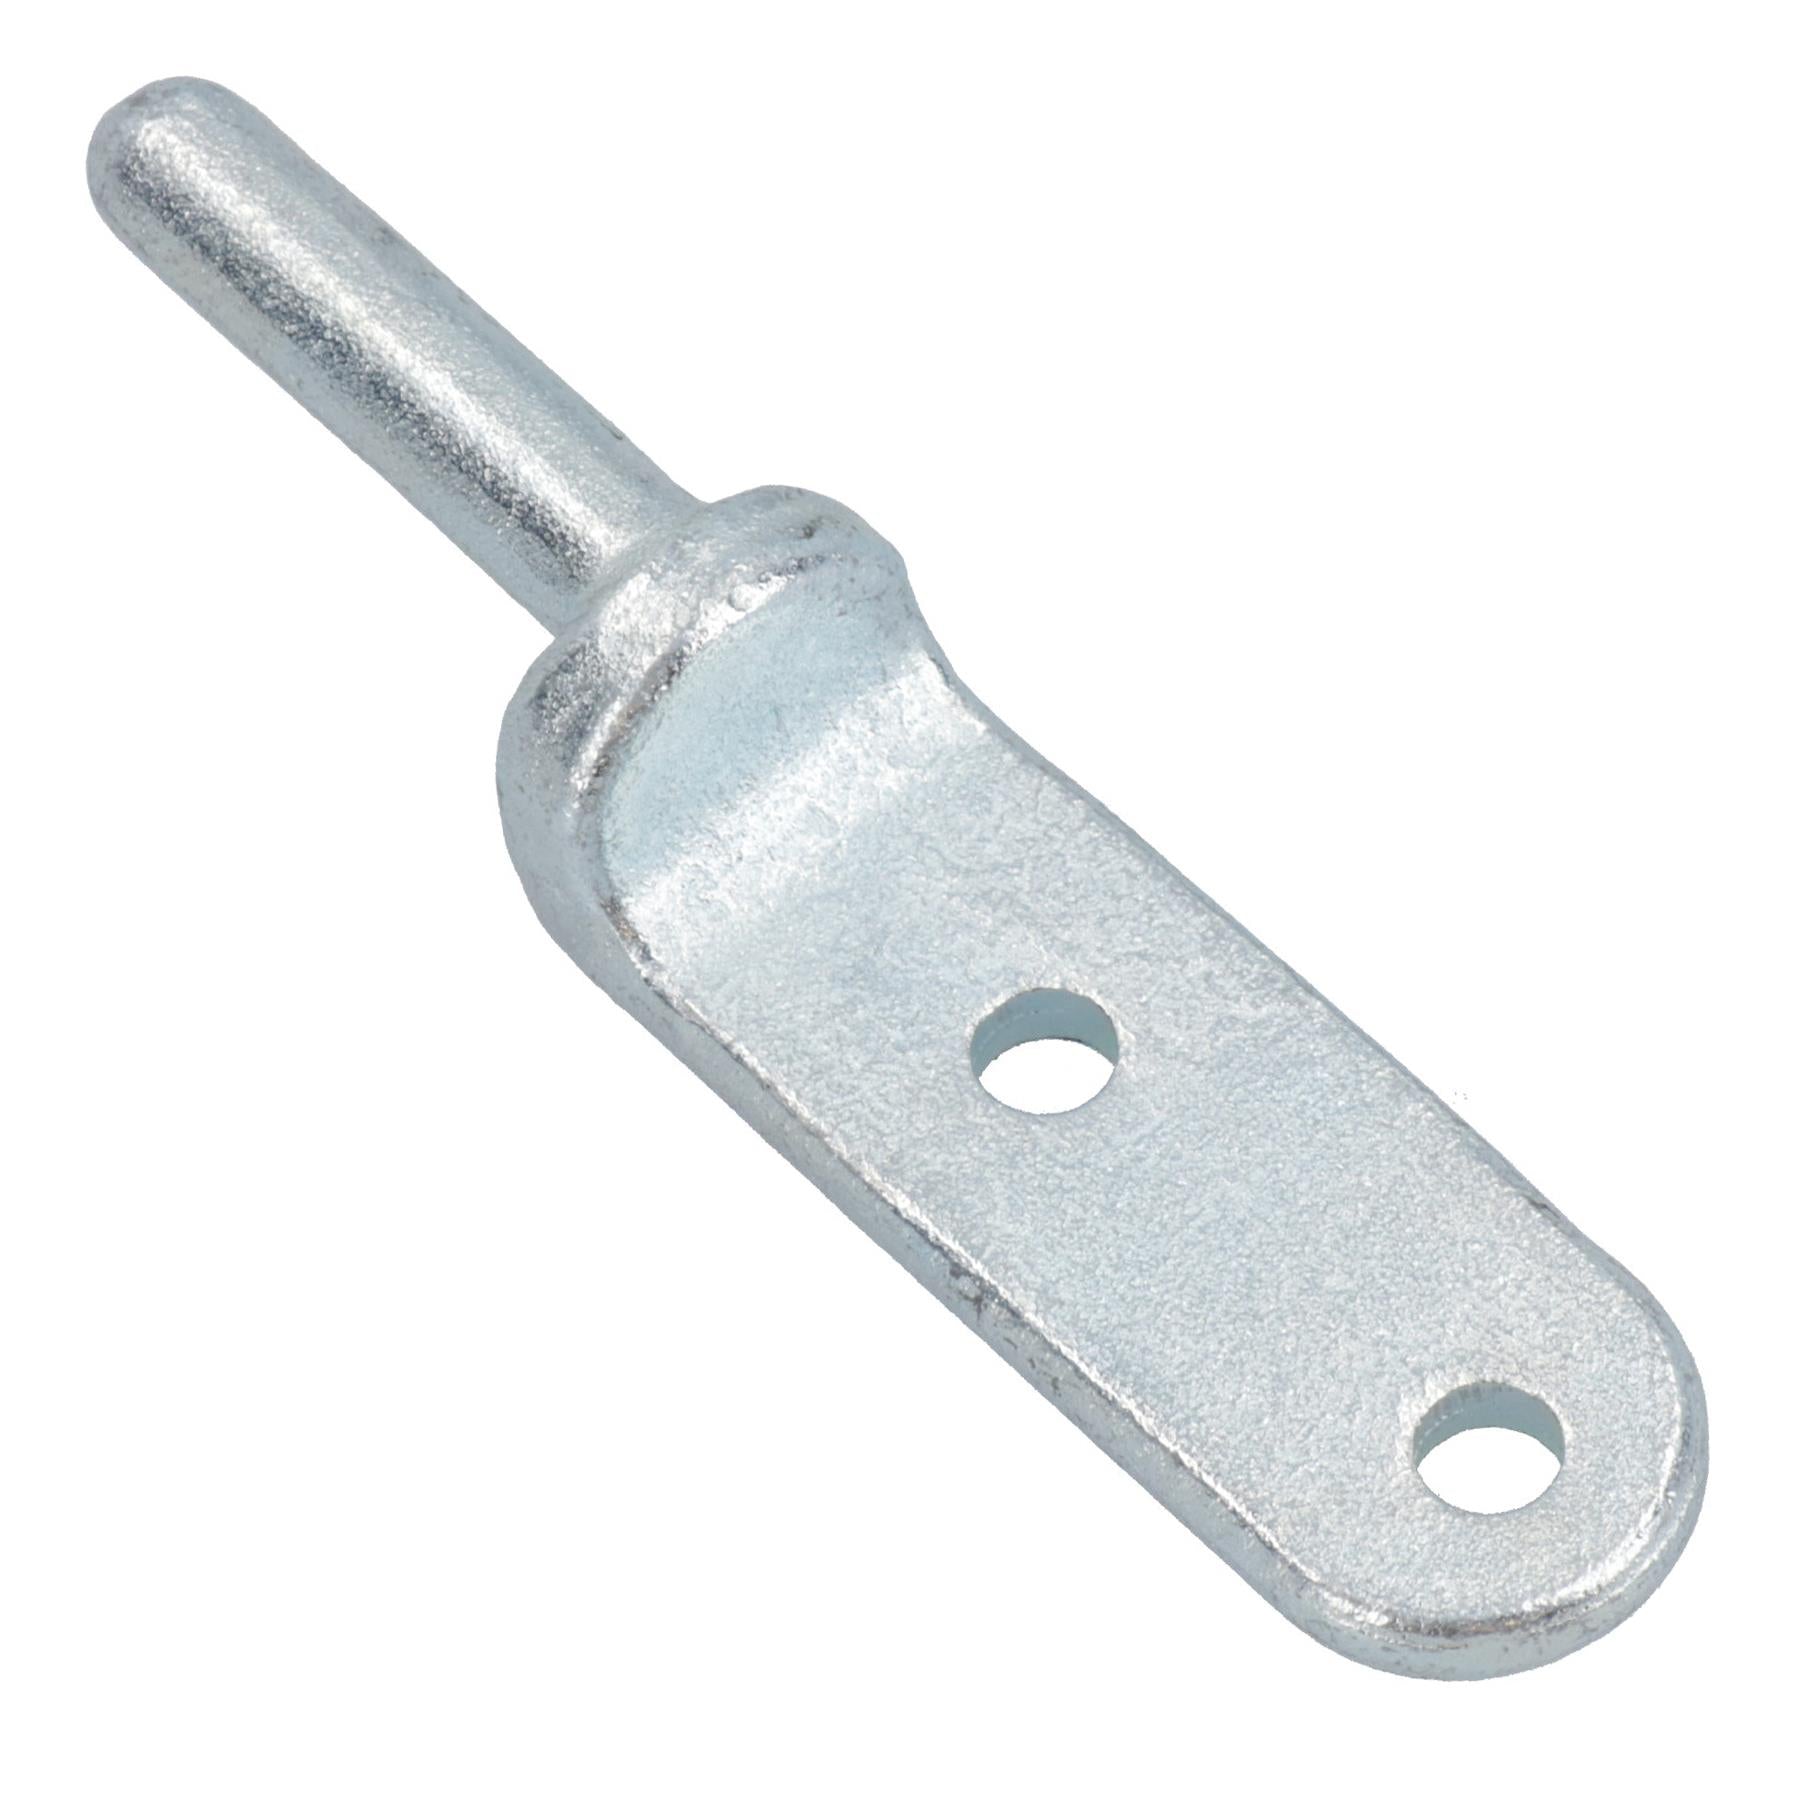 12.5mm Bolt On Gudgeon Tailboard Hinge Pin for Trucks Trailers Zinc Plated